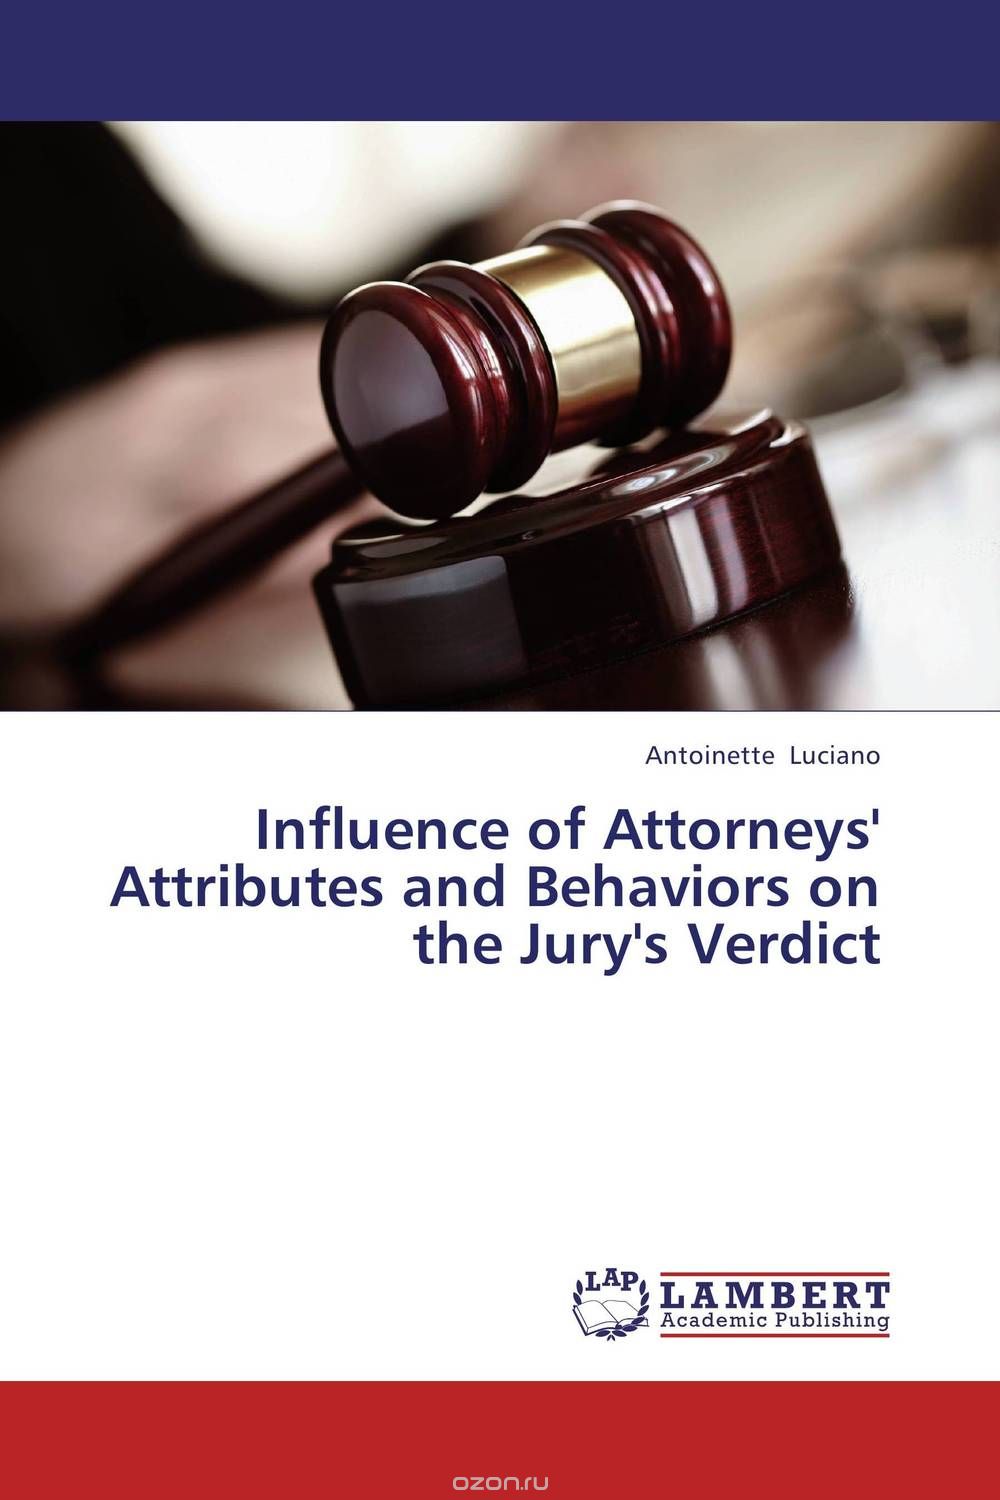 Influence of Attorneys' Attributes and Behaviors on the Jury's Verdict